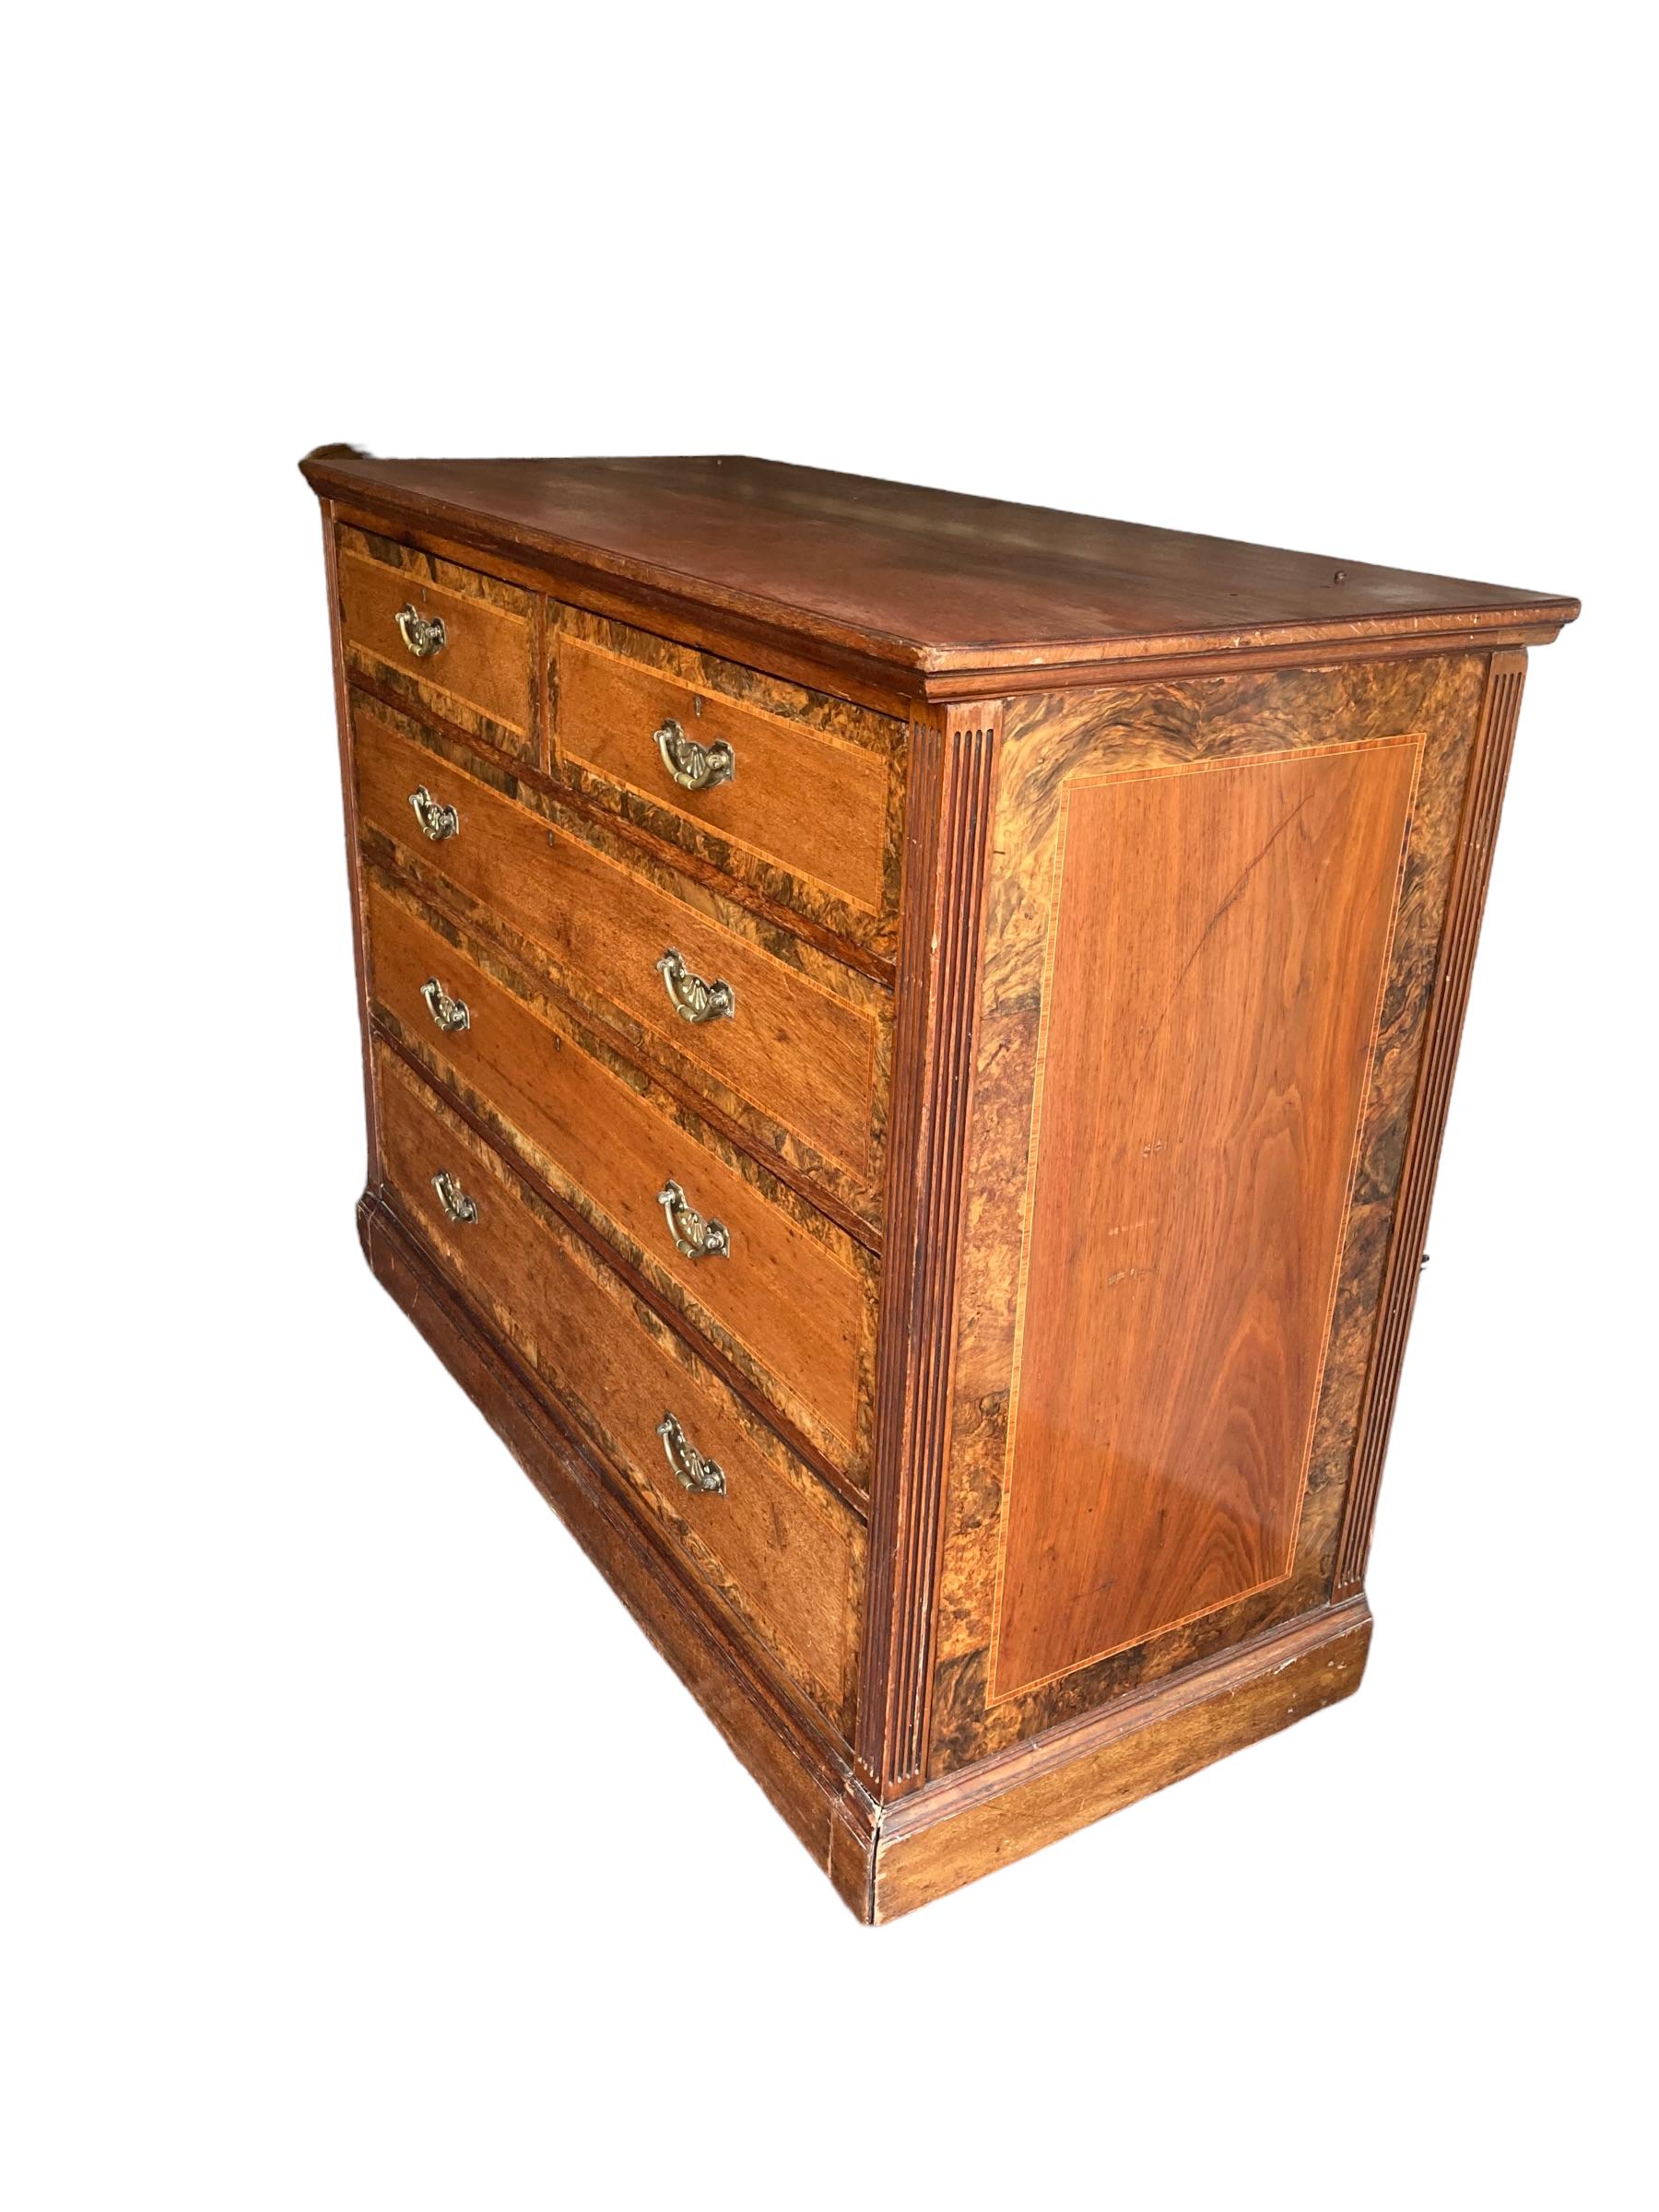 A beautiful and imposing original Holland and Sons chest of Drawers. Graduated drawers with rollers on bottom drawer. Burr Walnut with brass handles and an Empire style top. Circa 1800's.

H: 146cm

W: 134cm

D: 60cm

Graduated Drawers depth:

Twin: